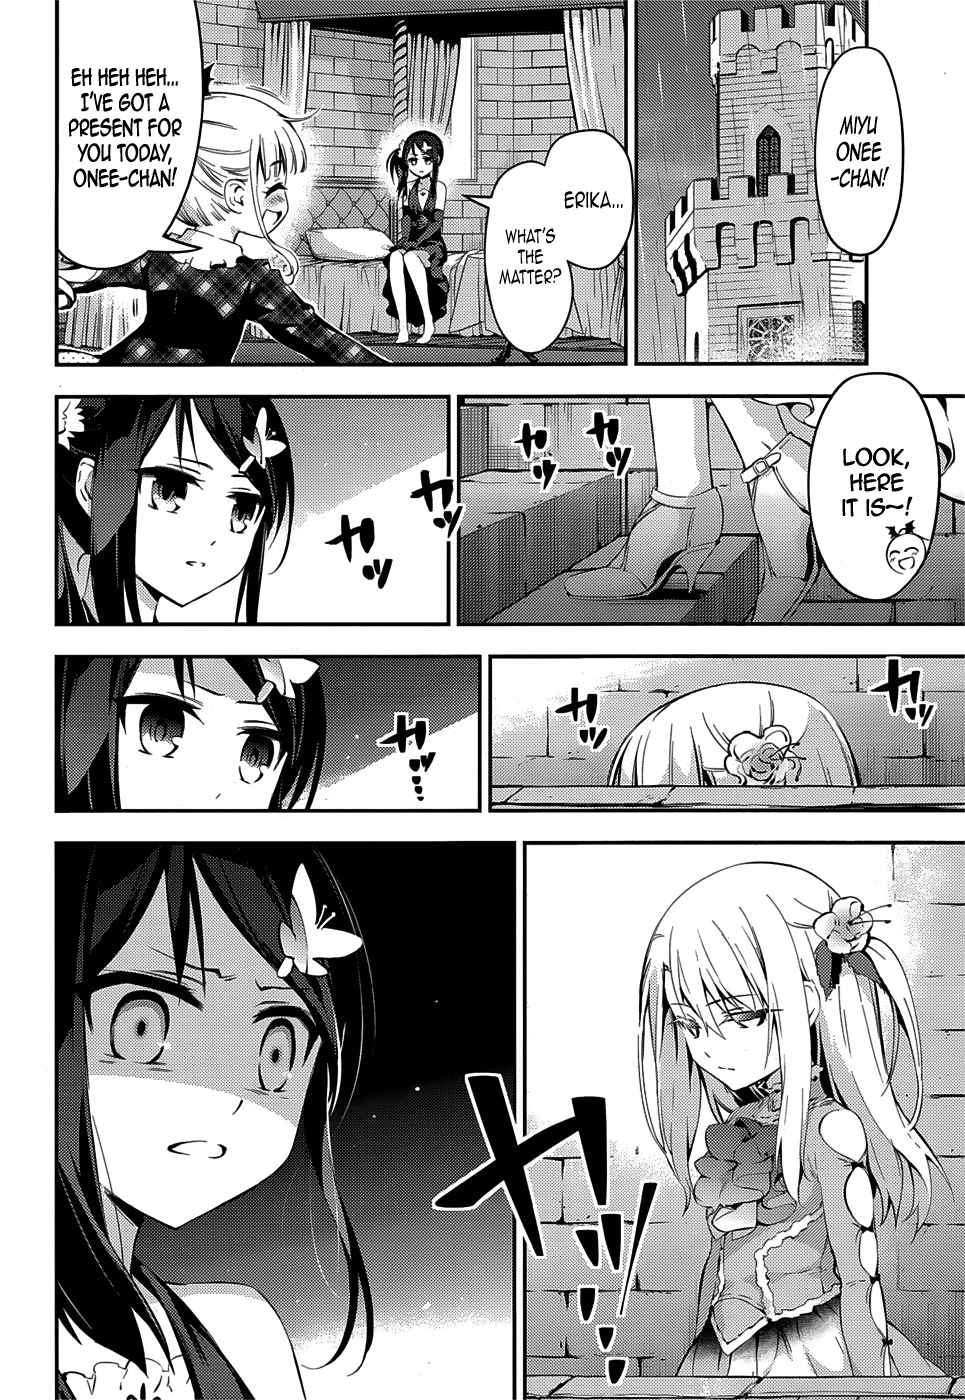 Fate/kaleid liner PRISMA☆ILLYA 3rei!! Vol. 3 Ch. 14 A Young Lady's Room